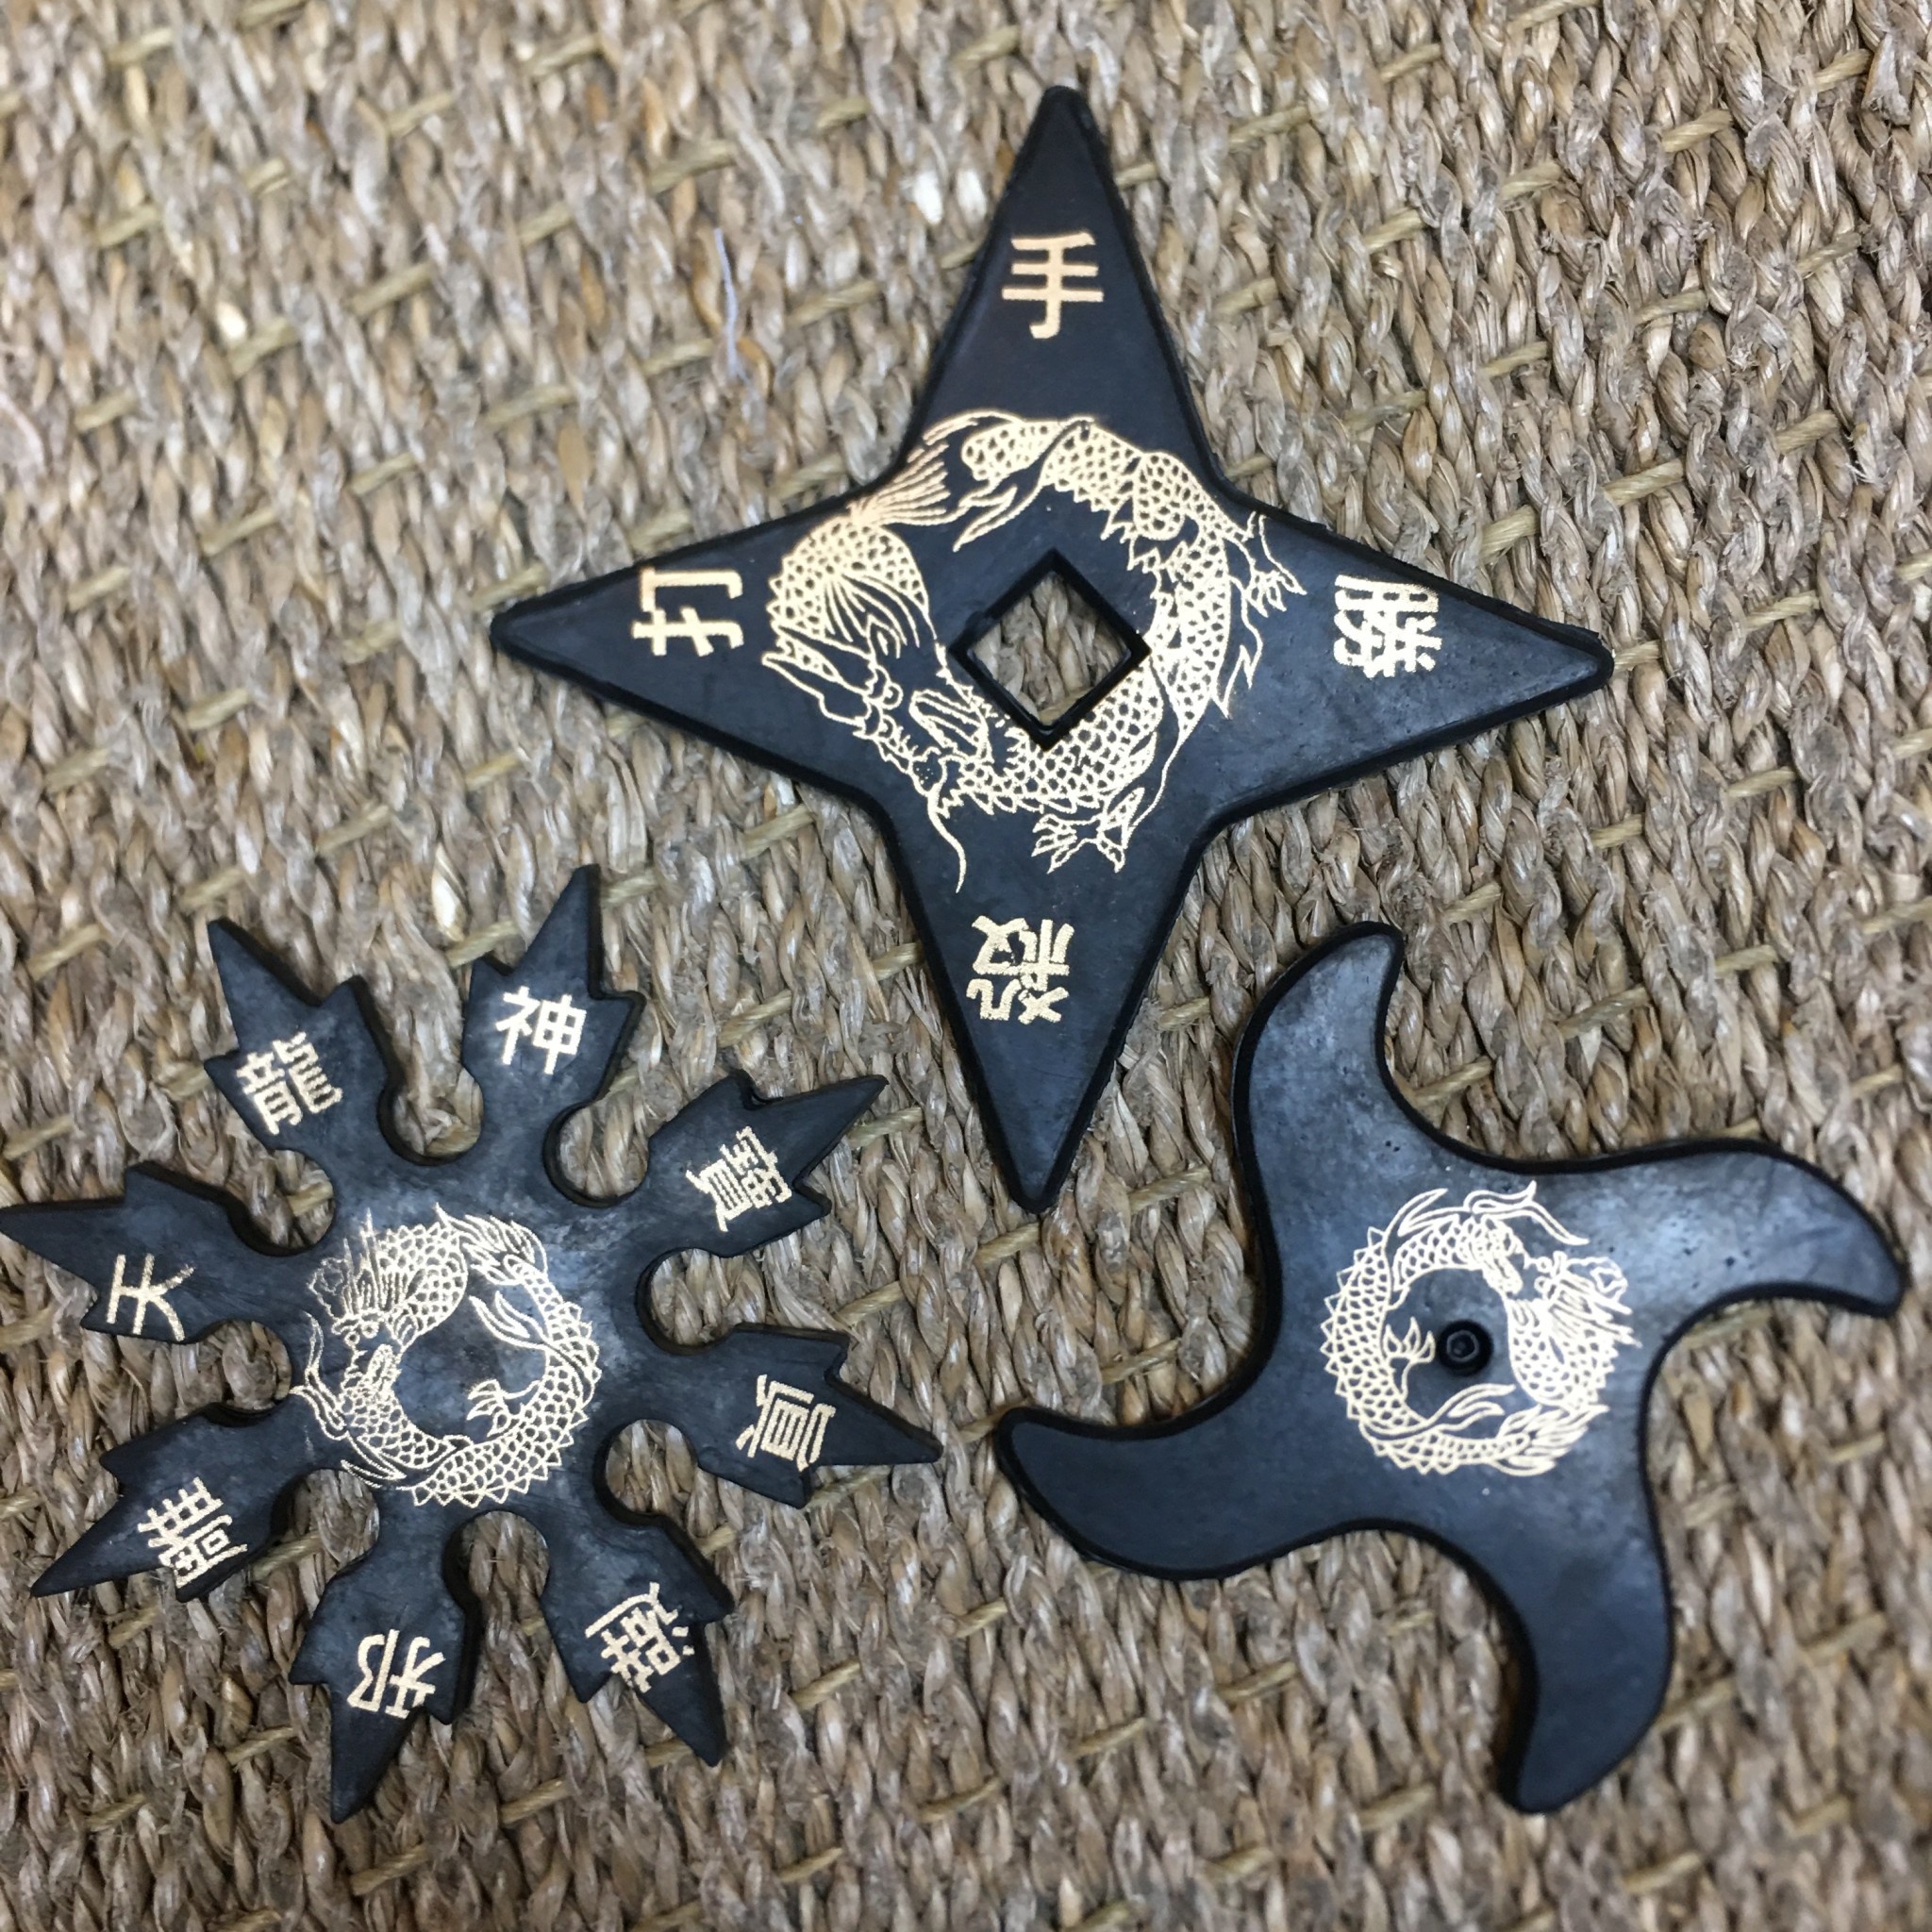 Rubber Ninja Stars are for practicing shuriken throwing - Enso